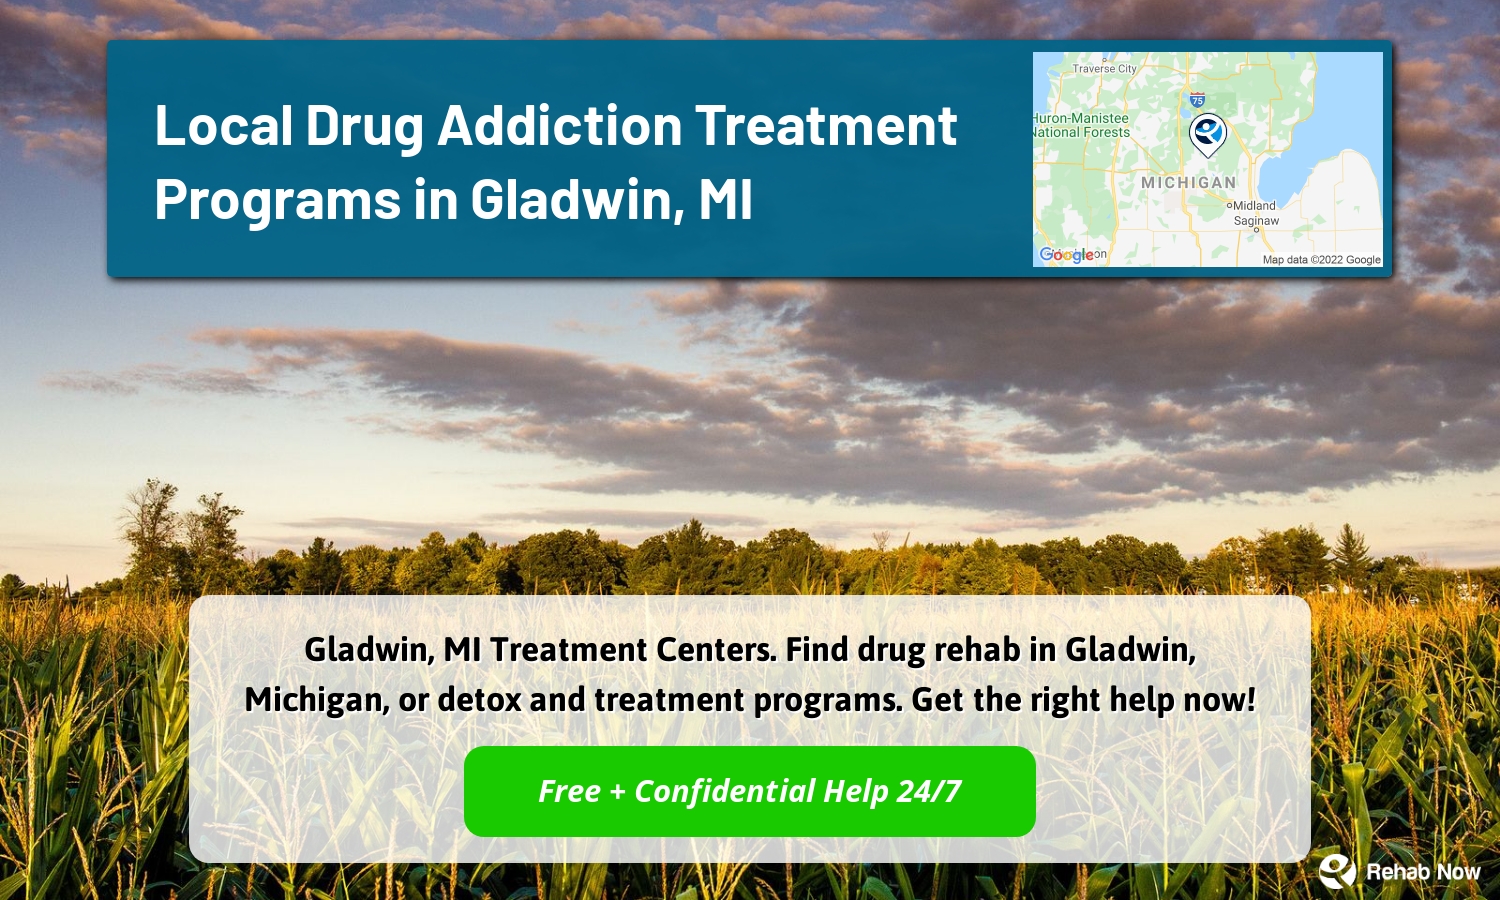 Gladwin, MI Treatment Centers. Find drug rehab in Gladwin, Michigan, or detox and treatment programs. Get the right help now!